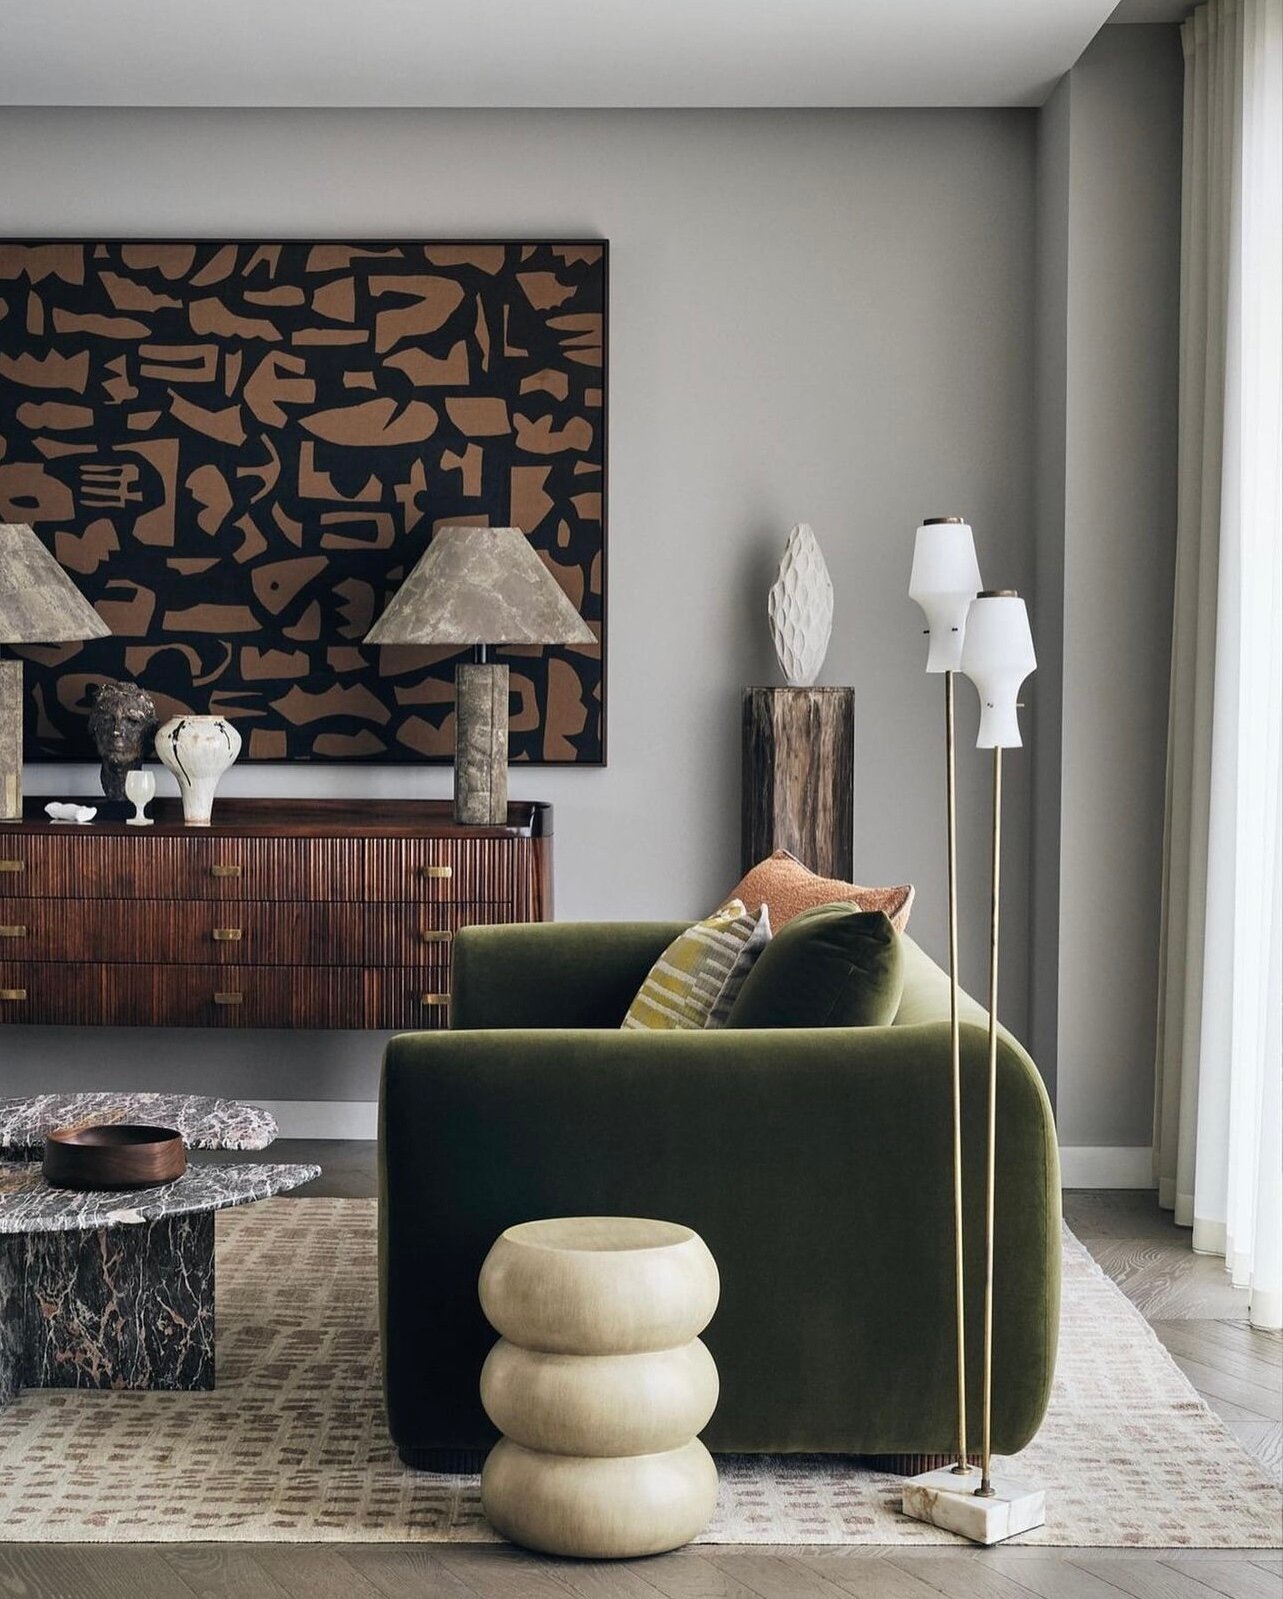 This London home is everything and more. Can't beat a beautiful green sofa. (Design by @laura_fulmine &amp; @londnewcastle) via @elledecorationuk #ALTforLiving #DesignerCrush⁠
.⁠
.⁠
.⁠
.⁠
.⁠
.⁠
#ALTInteriors #NYCInteriors #LivingRoomDesign #CoffeeTab